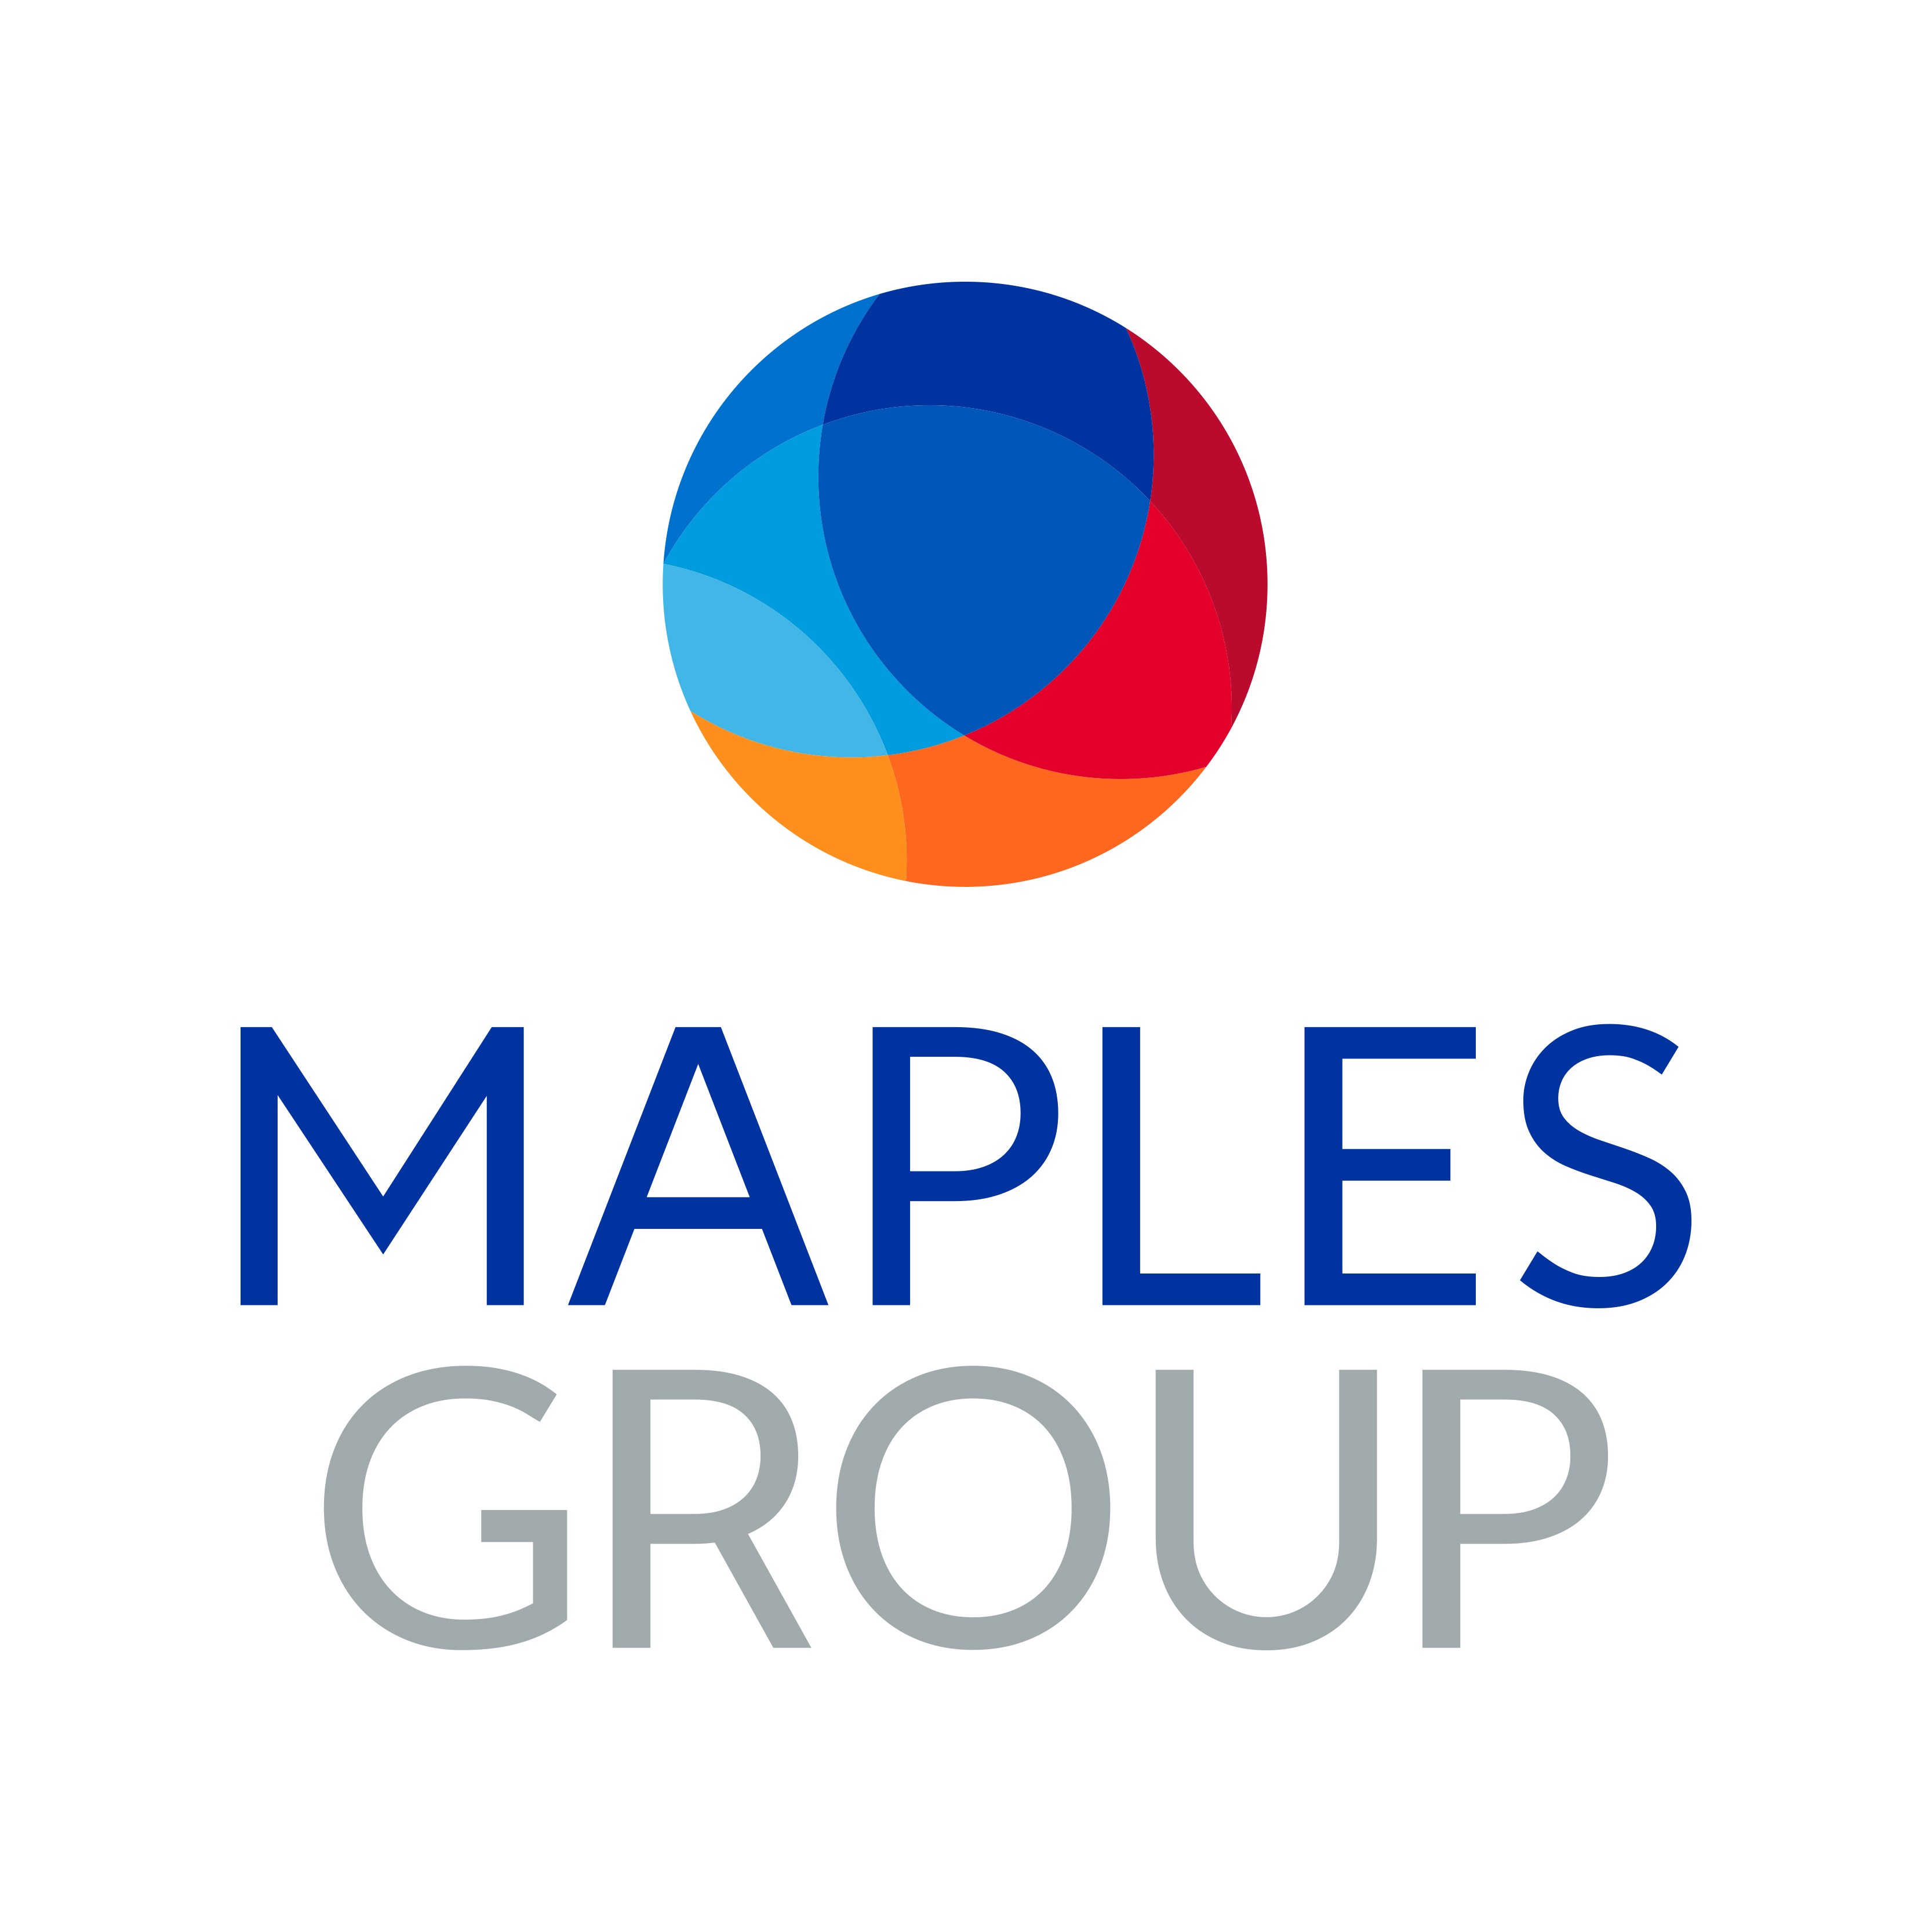 Maples Group (also known as Maples and Calder)